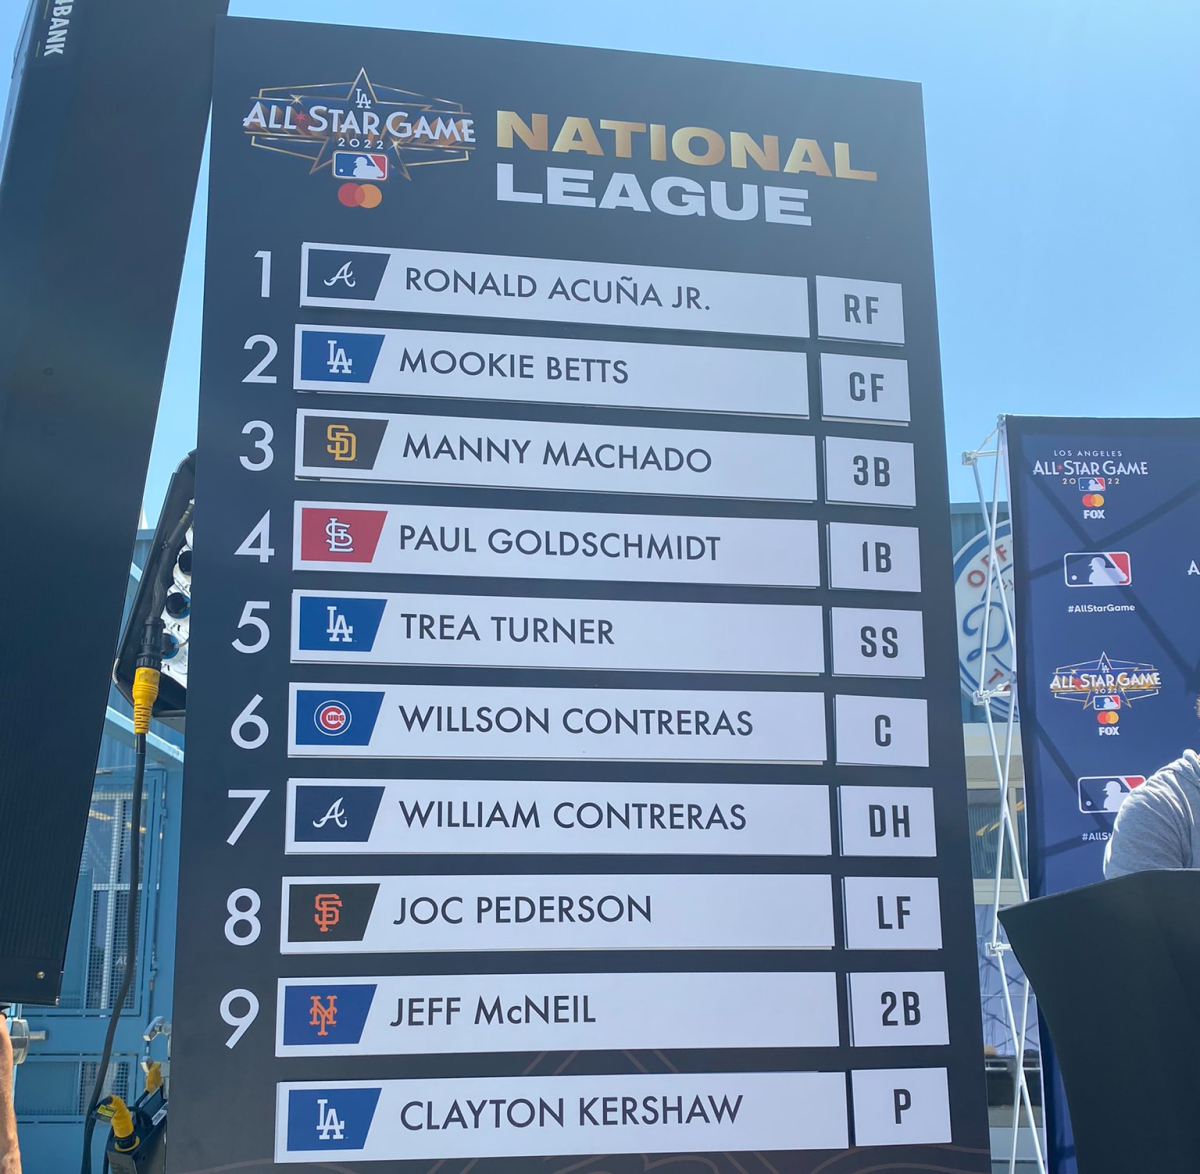 The All-Star Game National League lineup.